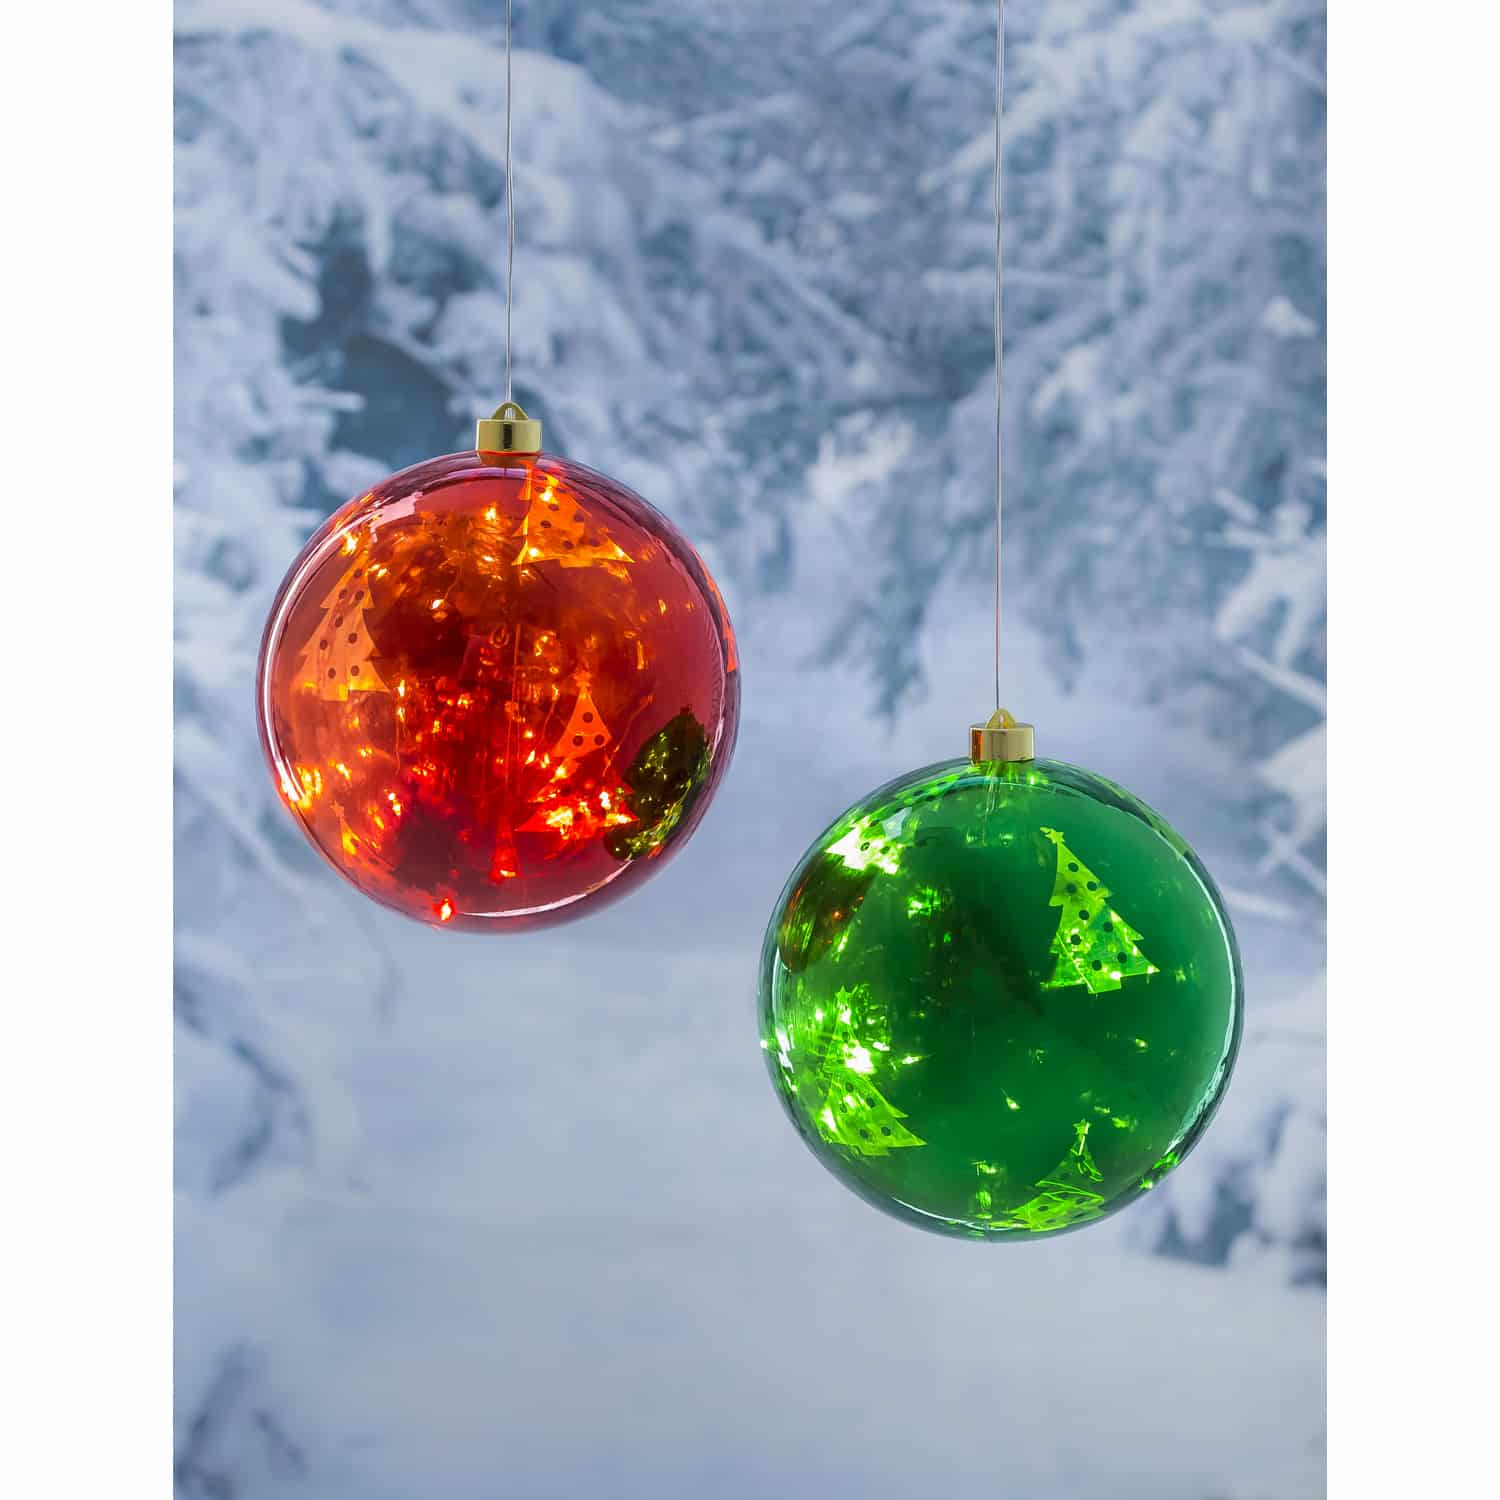 Light Up Ornament with Tree image